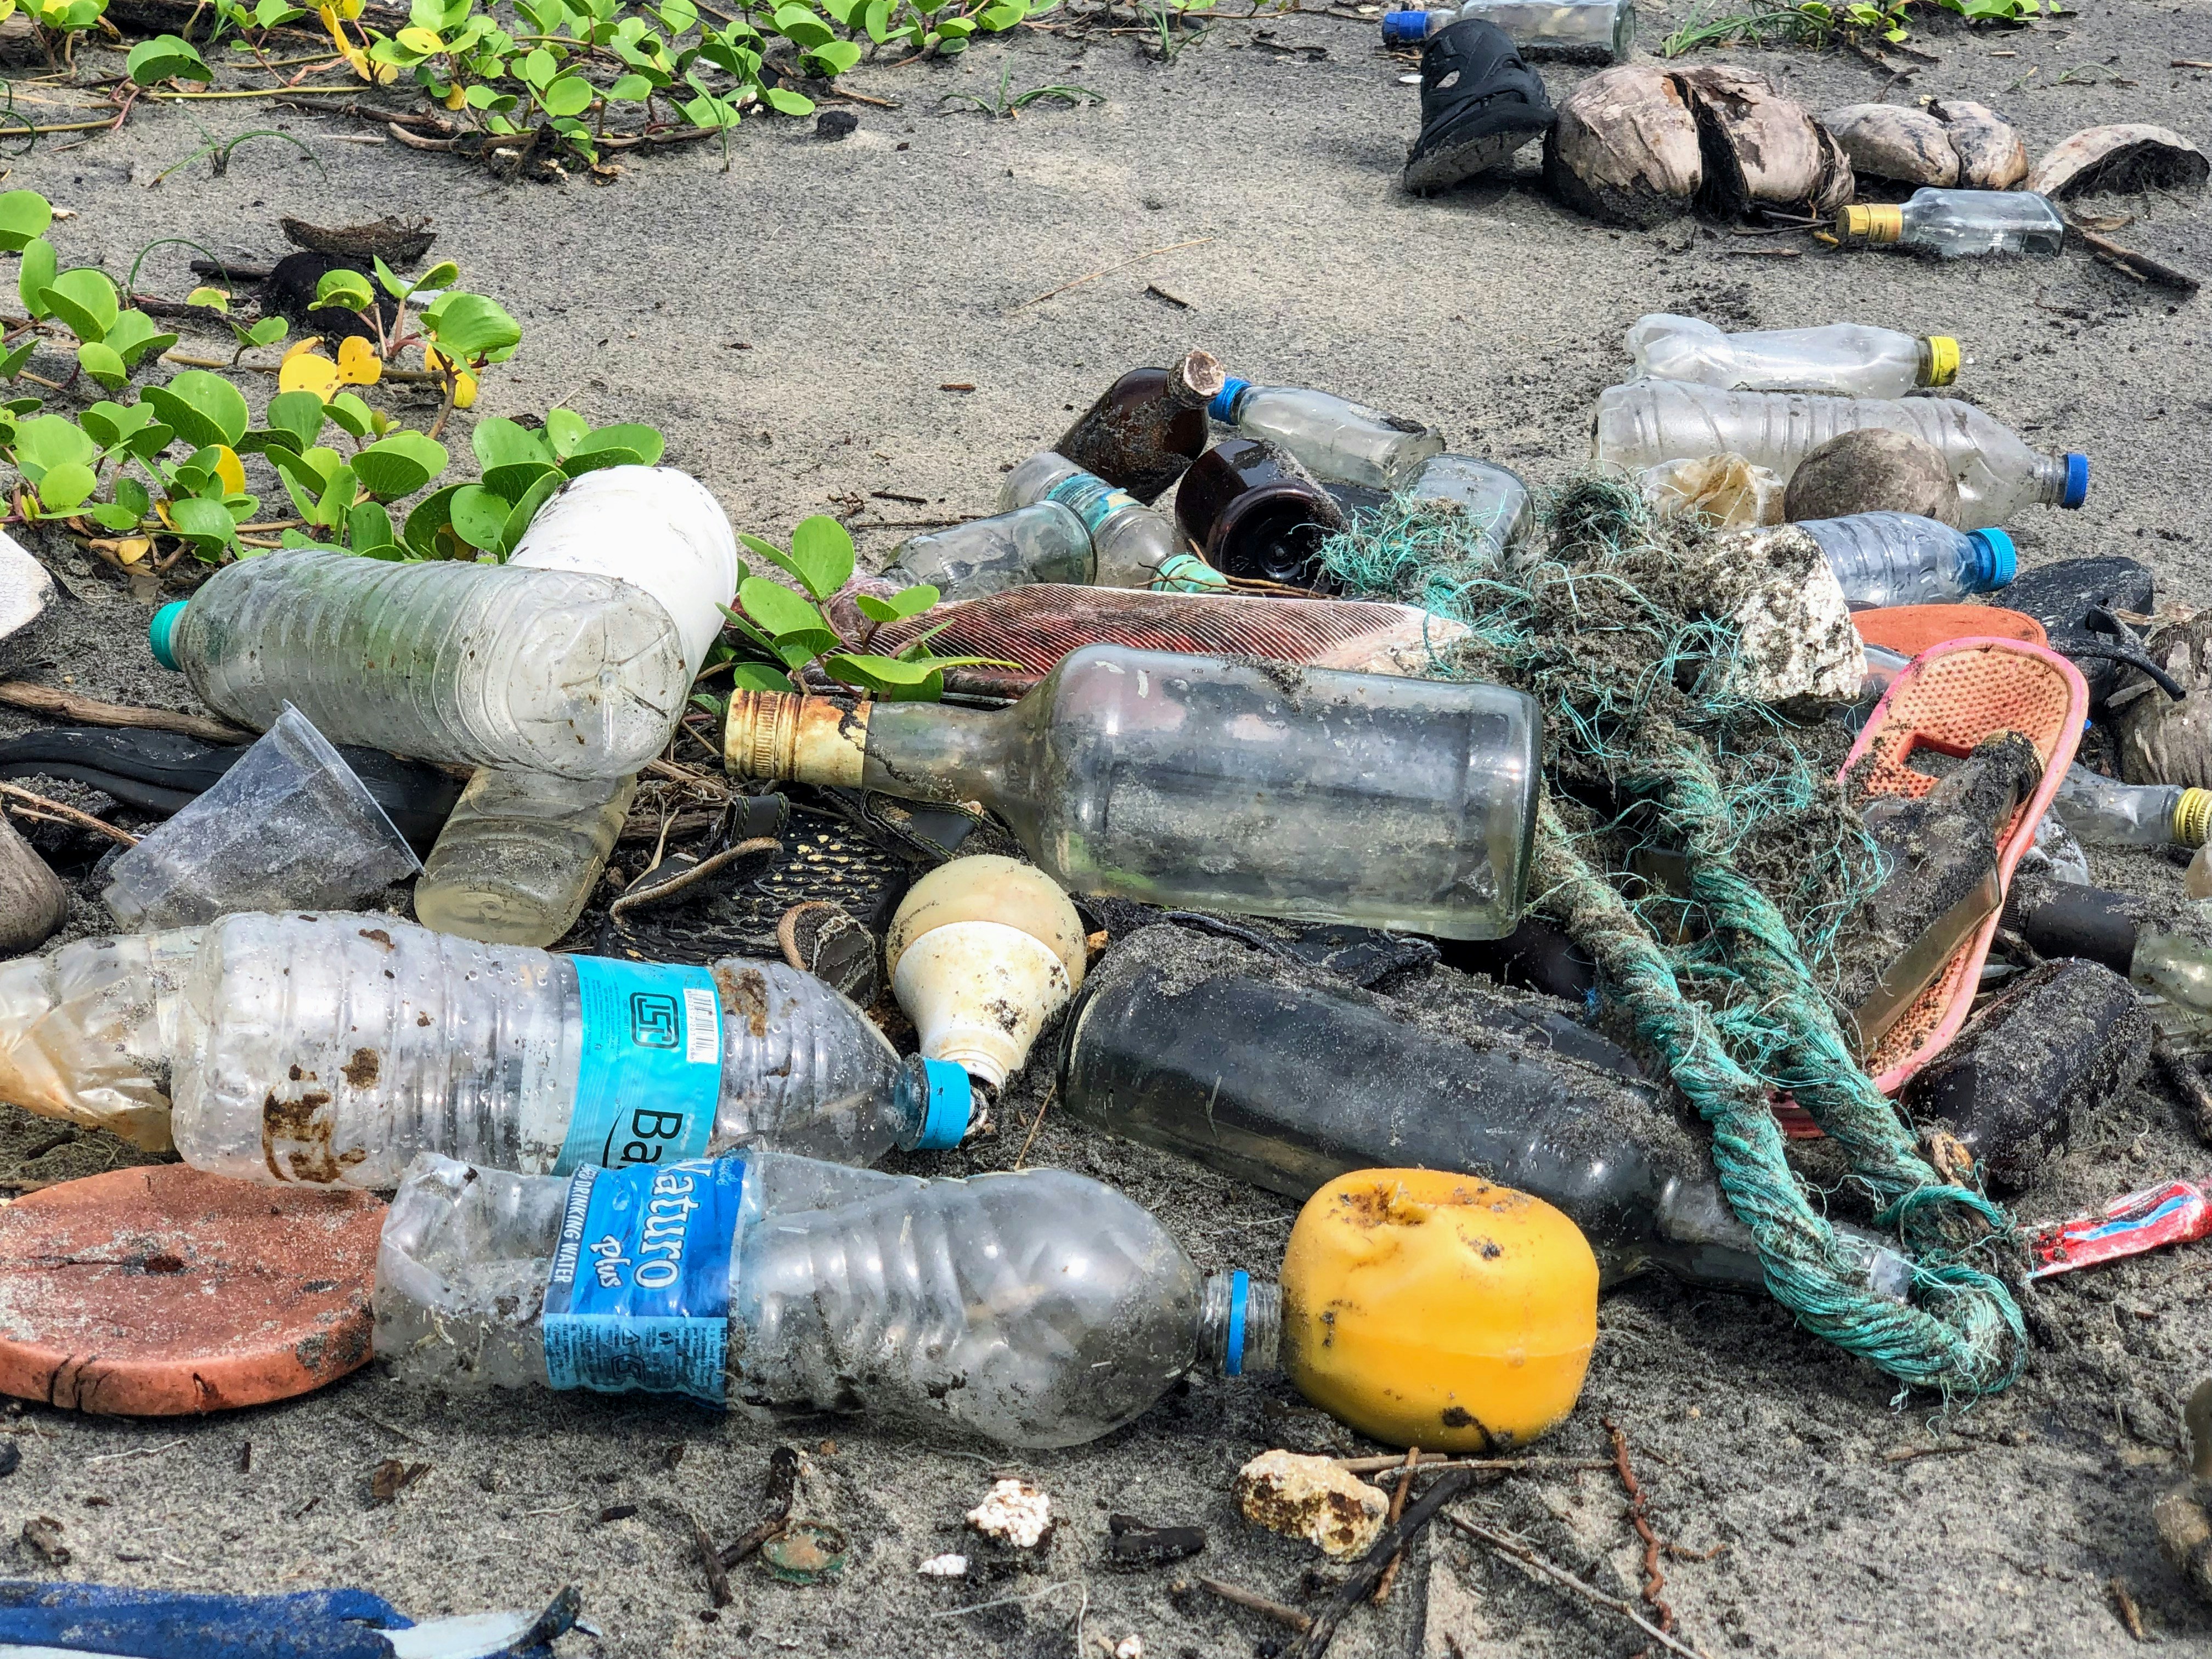 Protect Implementation of the Puerto Rico Plastics Ban